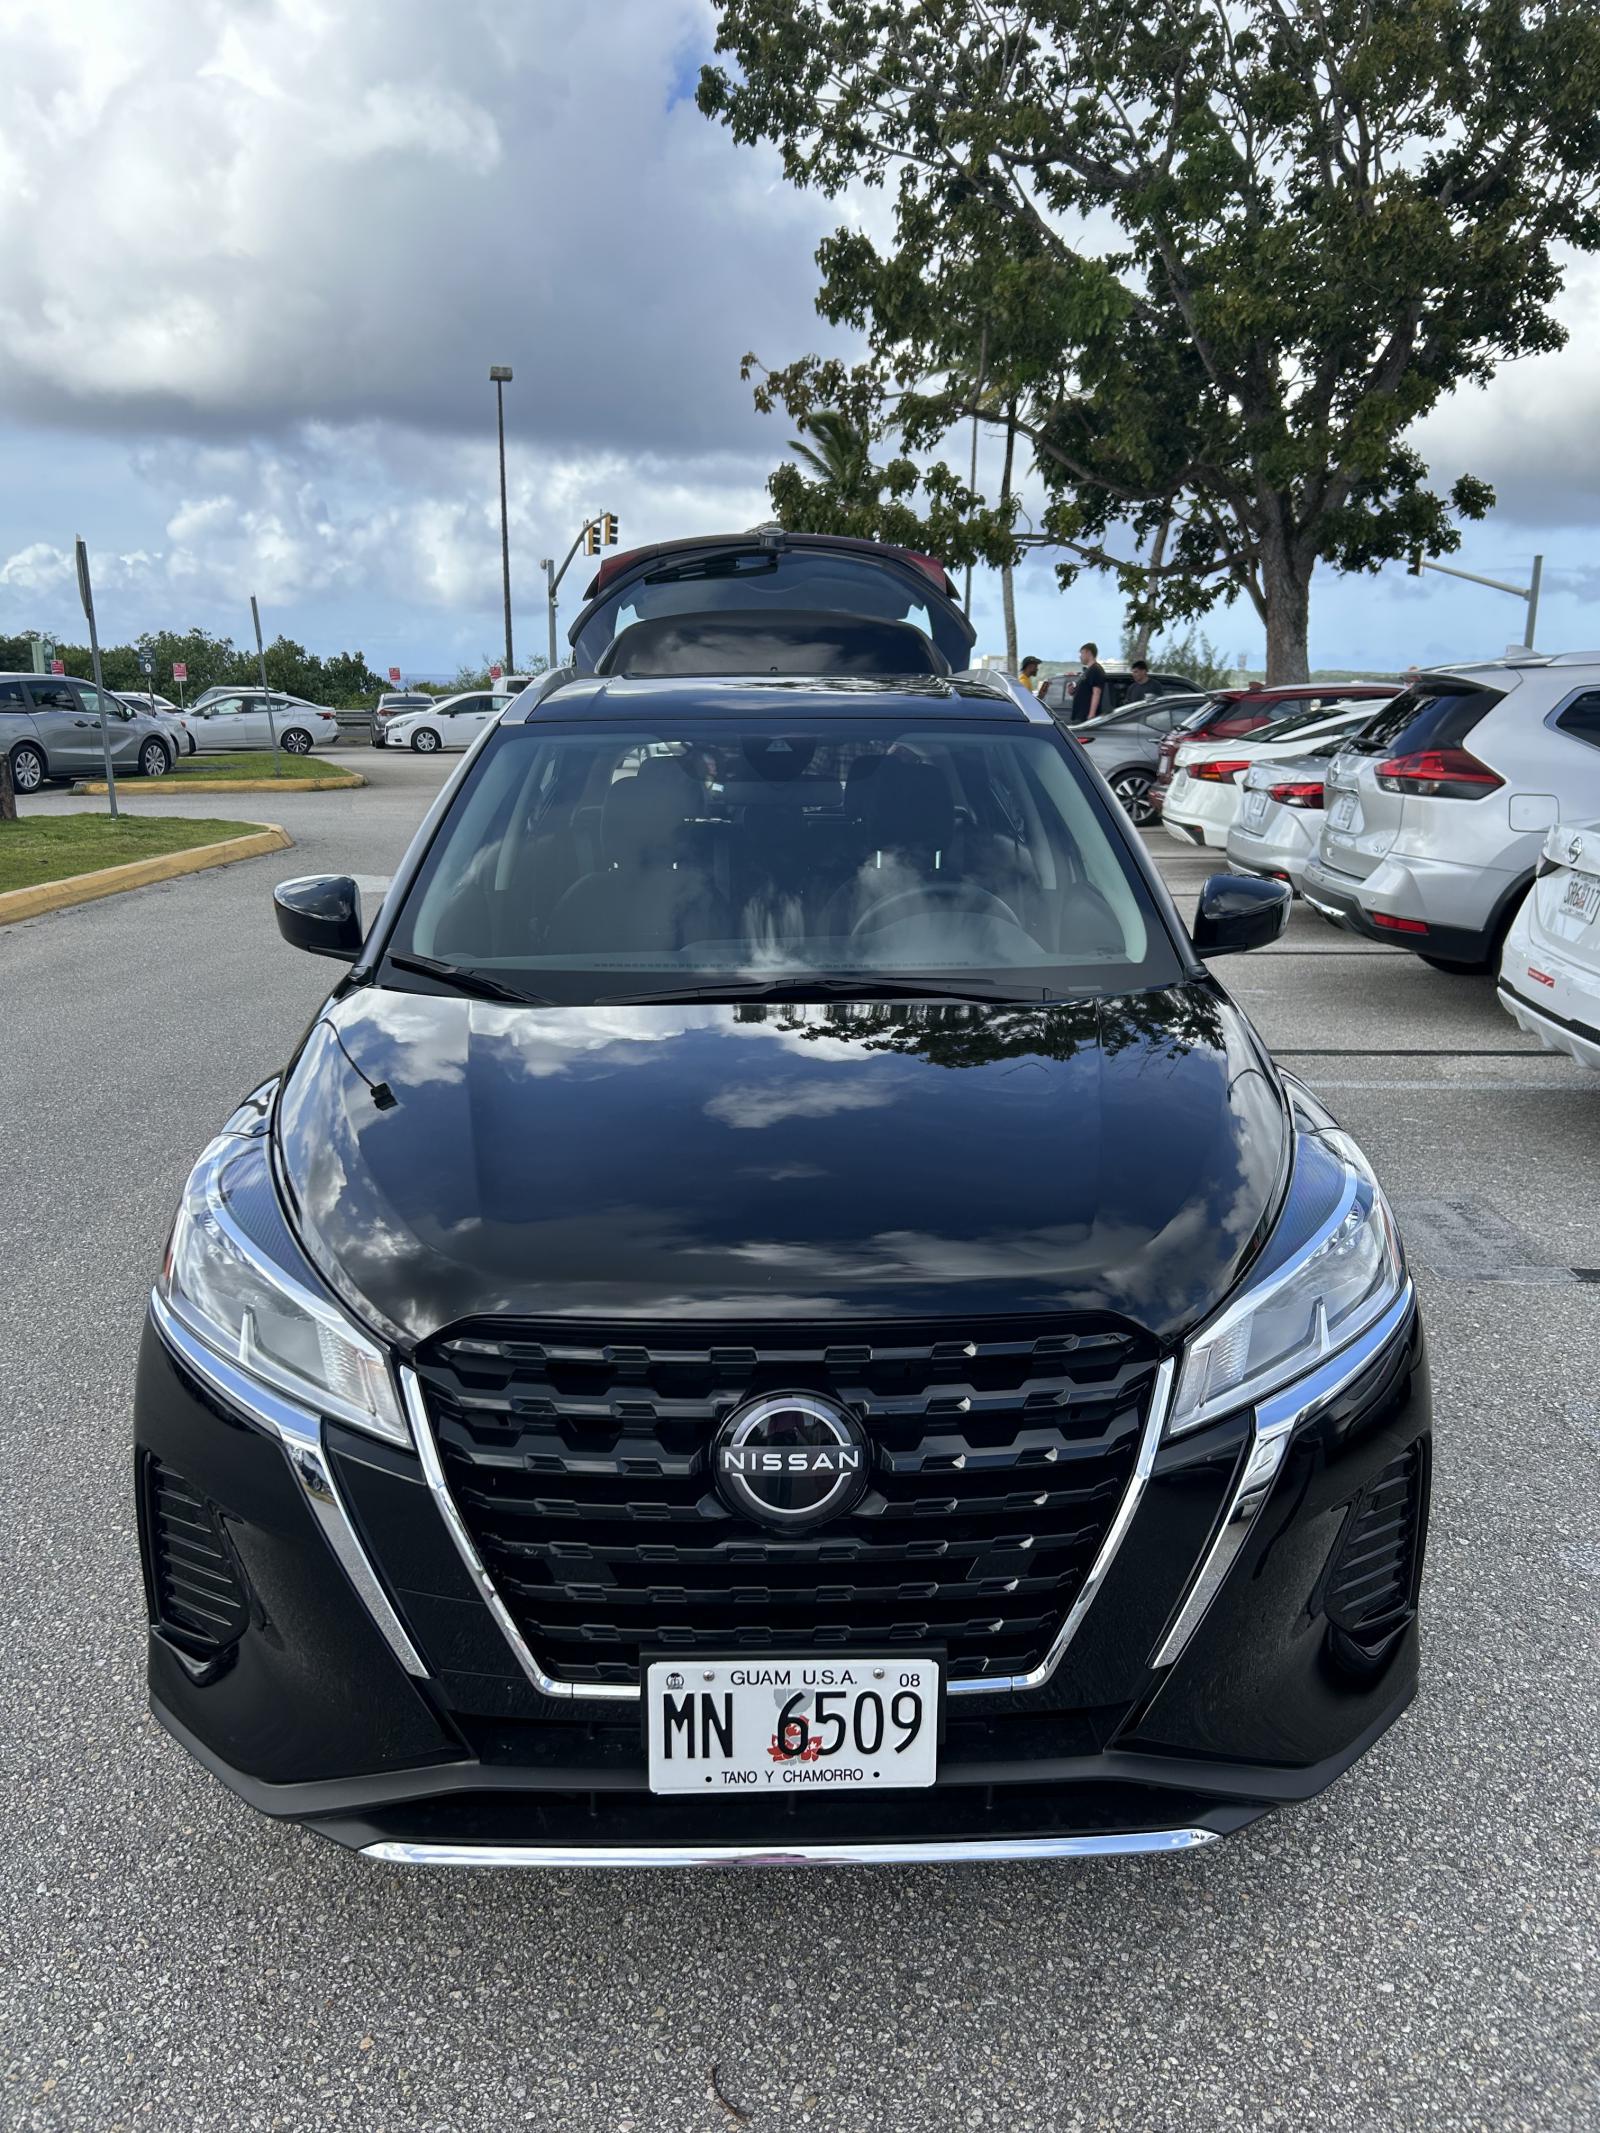 I made a reservation for a family of 3 with children Nissan small suv, and I used it well for 5 days. The size was right and the outside was clean. I used an additional child seat and the car seat was in good condition. The staff was kind, and it was useful for touring the southern part and going to Kmart. Guam is like a rental car :)